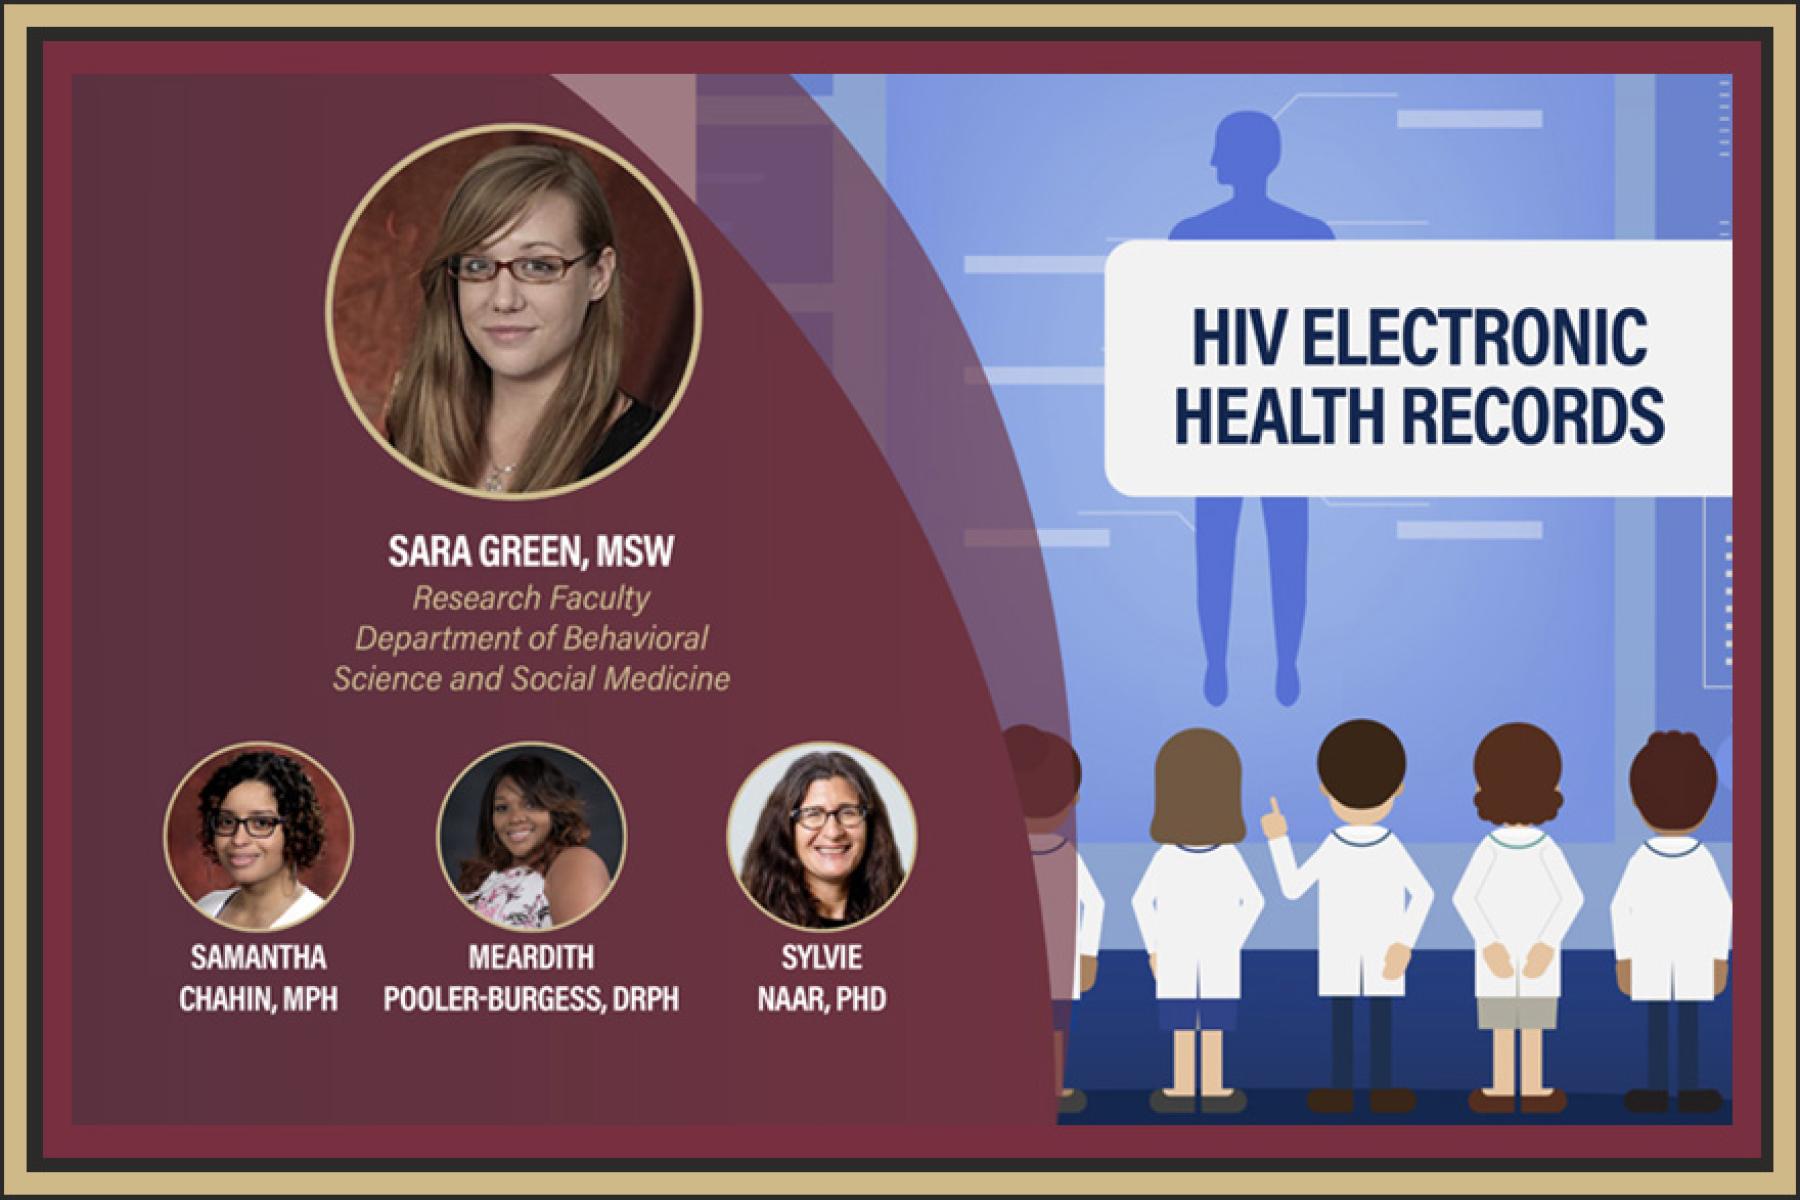 Regulatory Issues in HIV Electronic Health Records